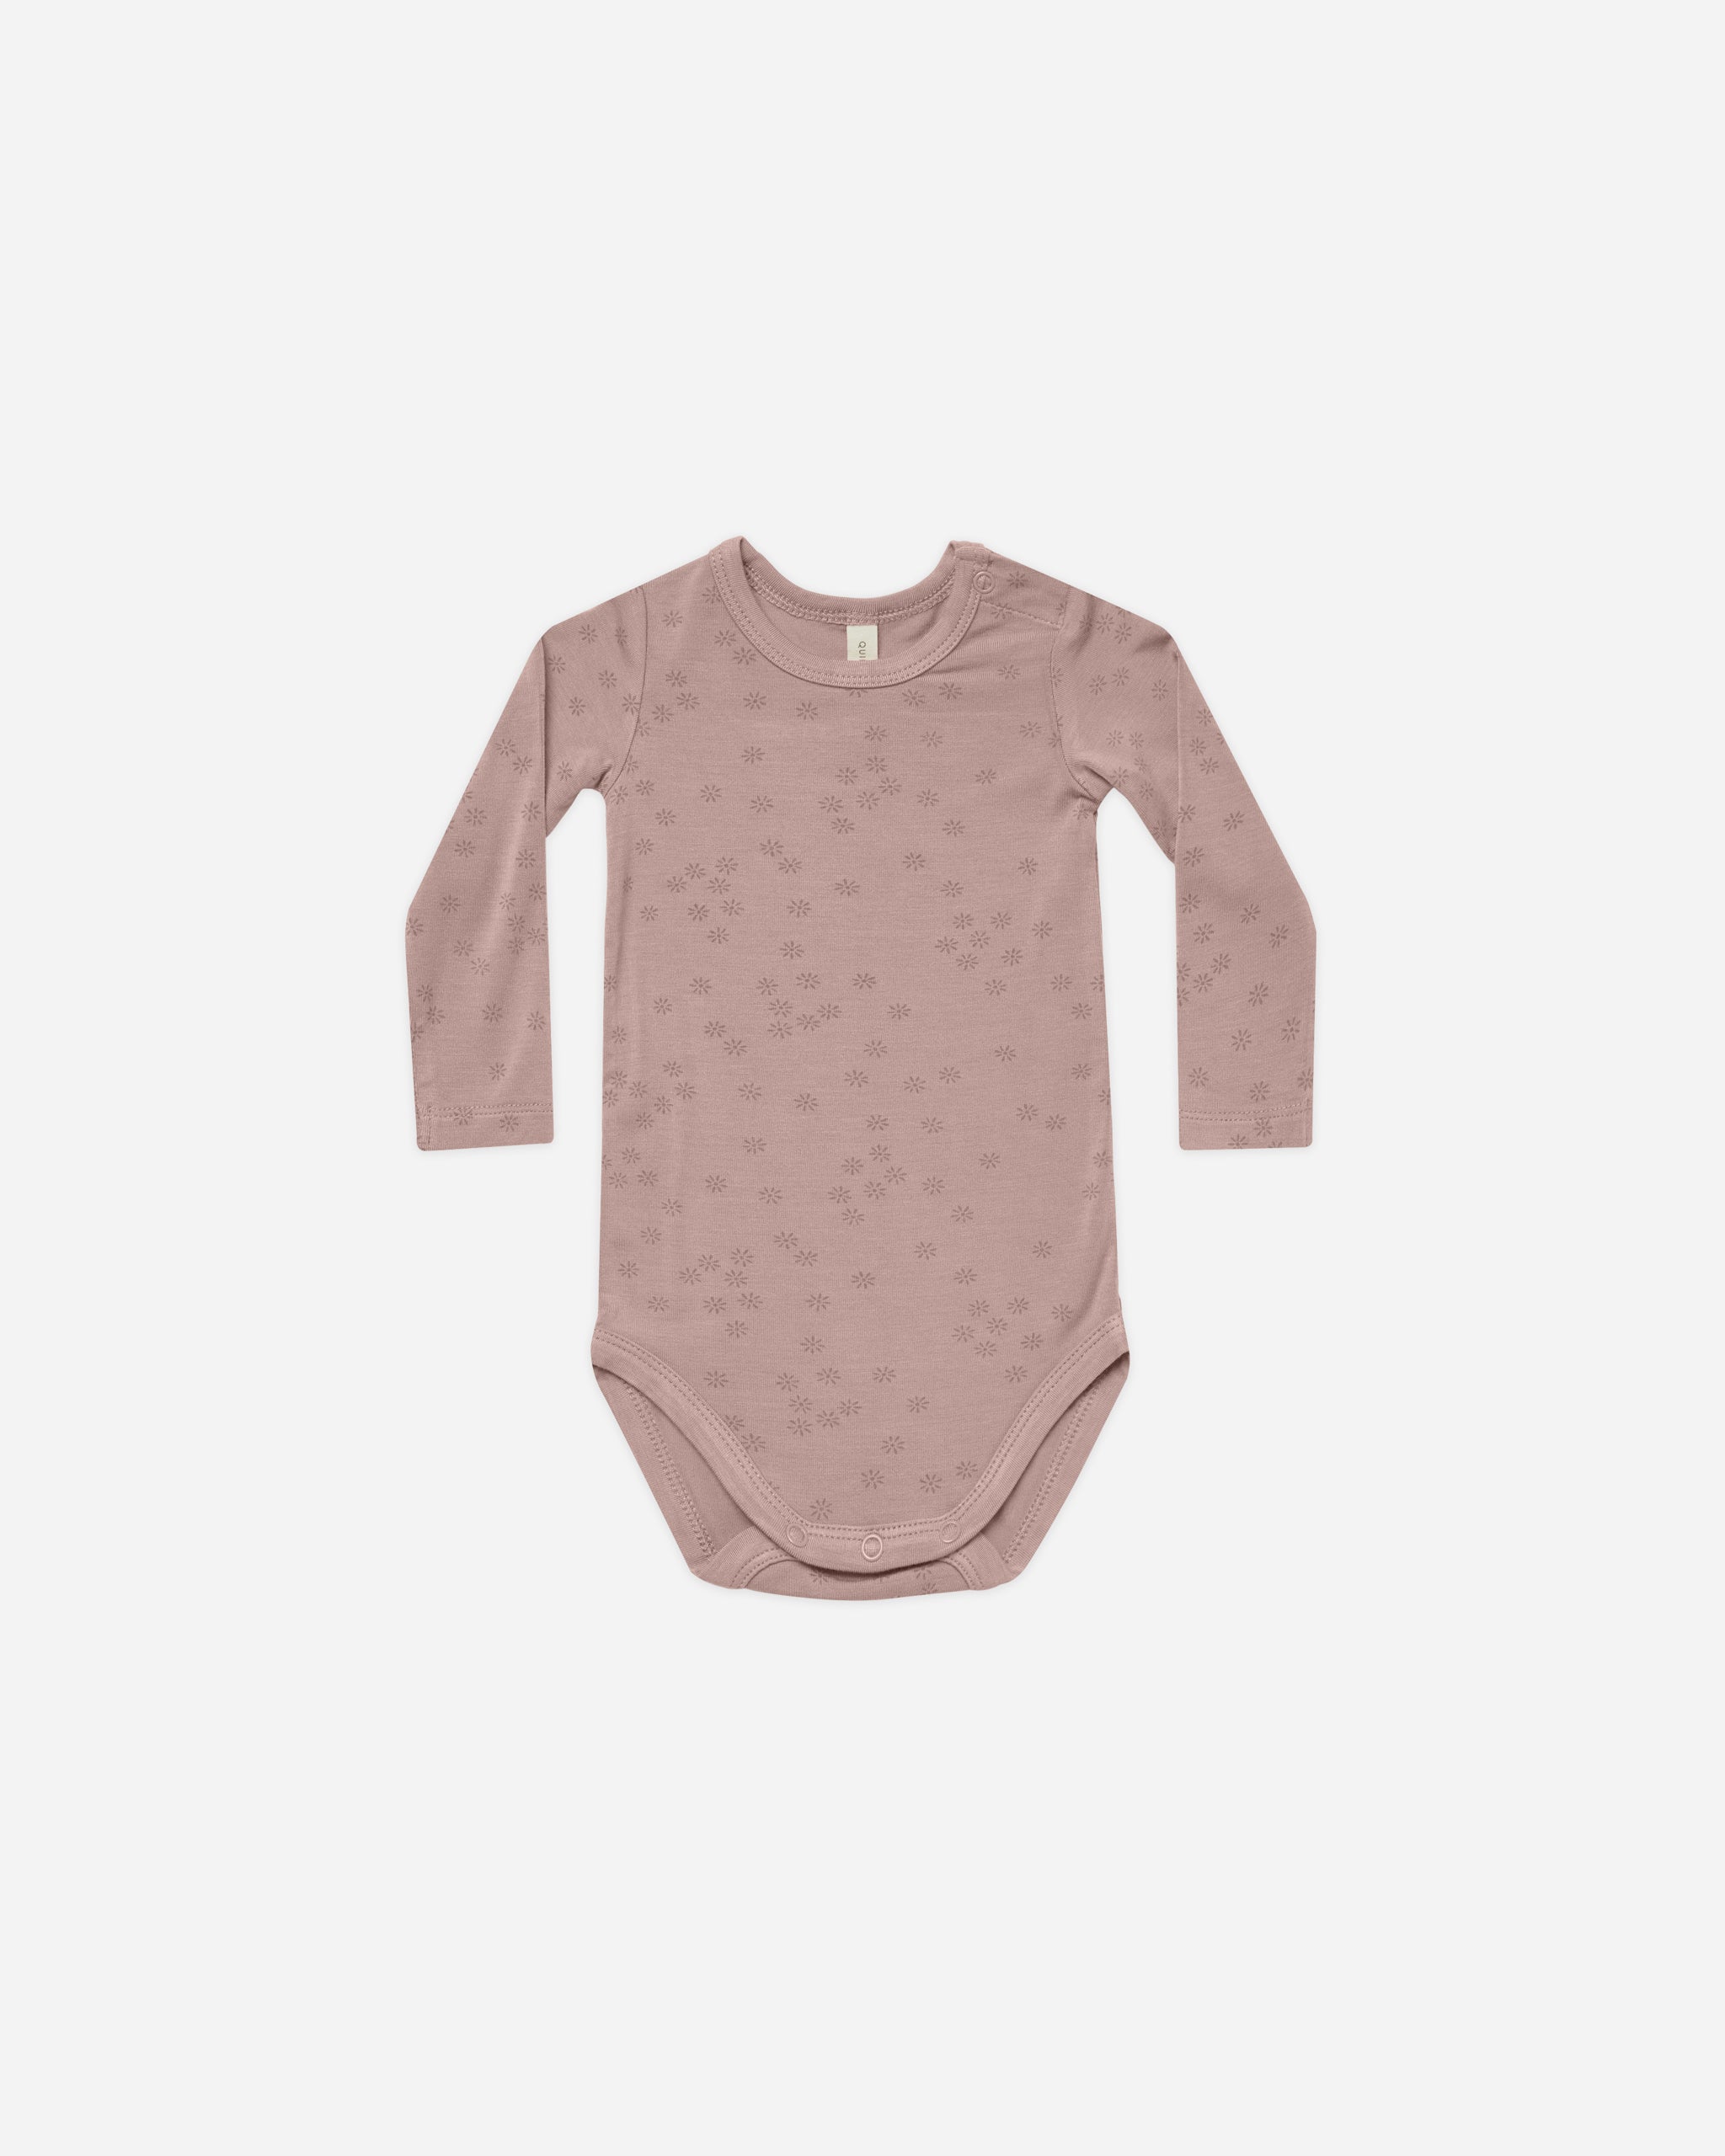 Bamboo Long Sleeve Bodysuit || Mauve Bloom - Rylee + Cru | Kids Clothes | Trendy Baby Clothes | Modern Infant Outfits |